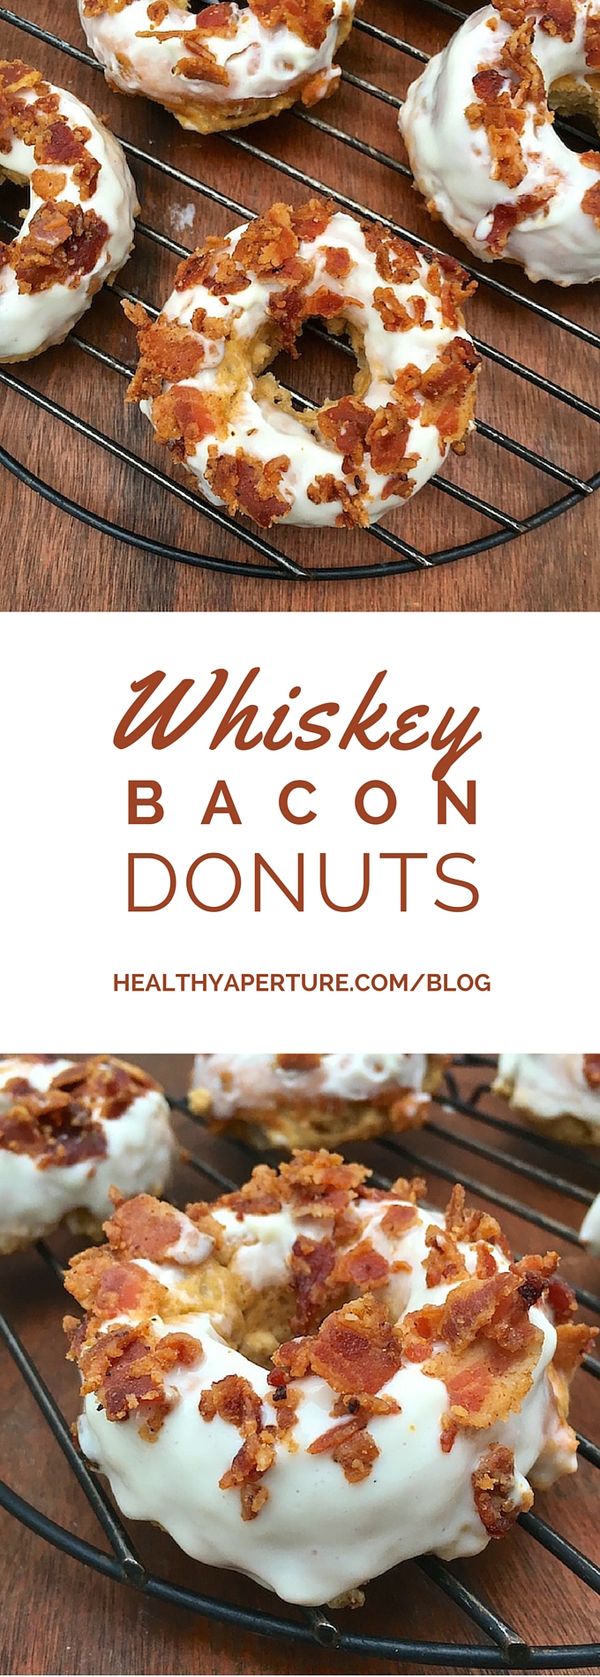 Whiskey Bacon Baked Donuts